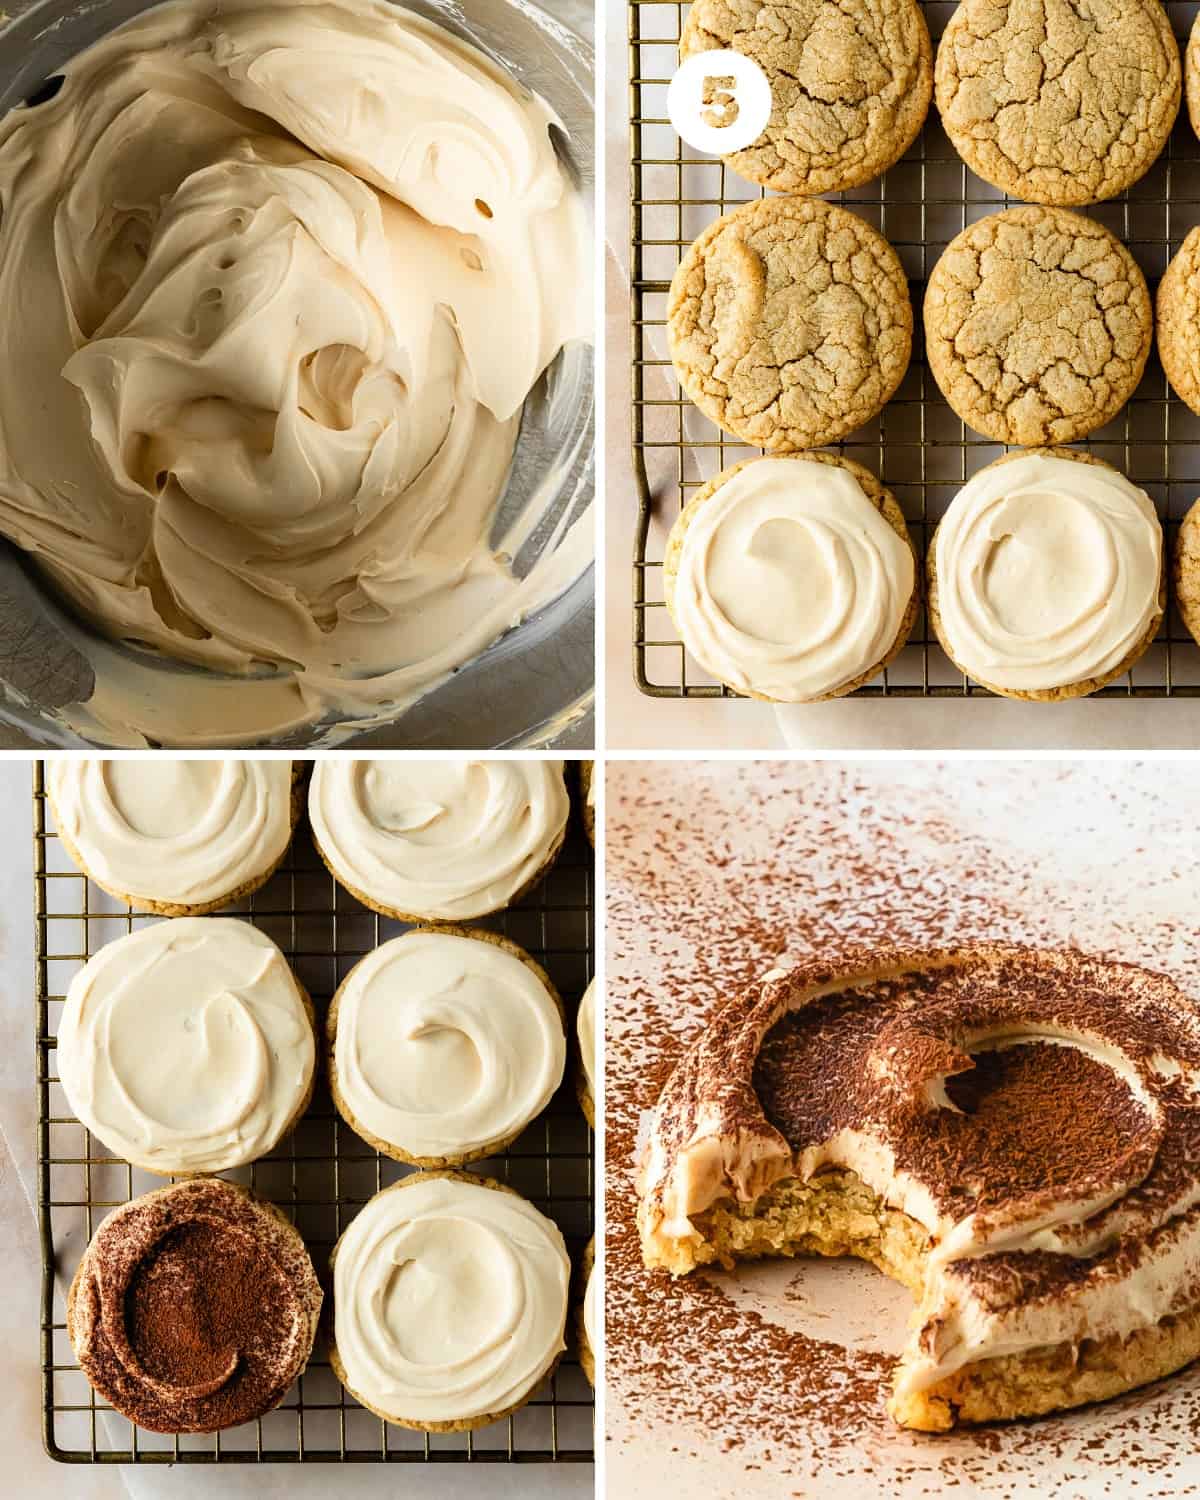 Top the soft and chewy espresso sugar cookies with 1 -2  tablespoons (15 - 30 ml) mascarpone frosting. Use the back of a spoon or an icing spatula to smoot the frosting across the top in a circular motion. Dust with cocoa powder and enjoy. 